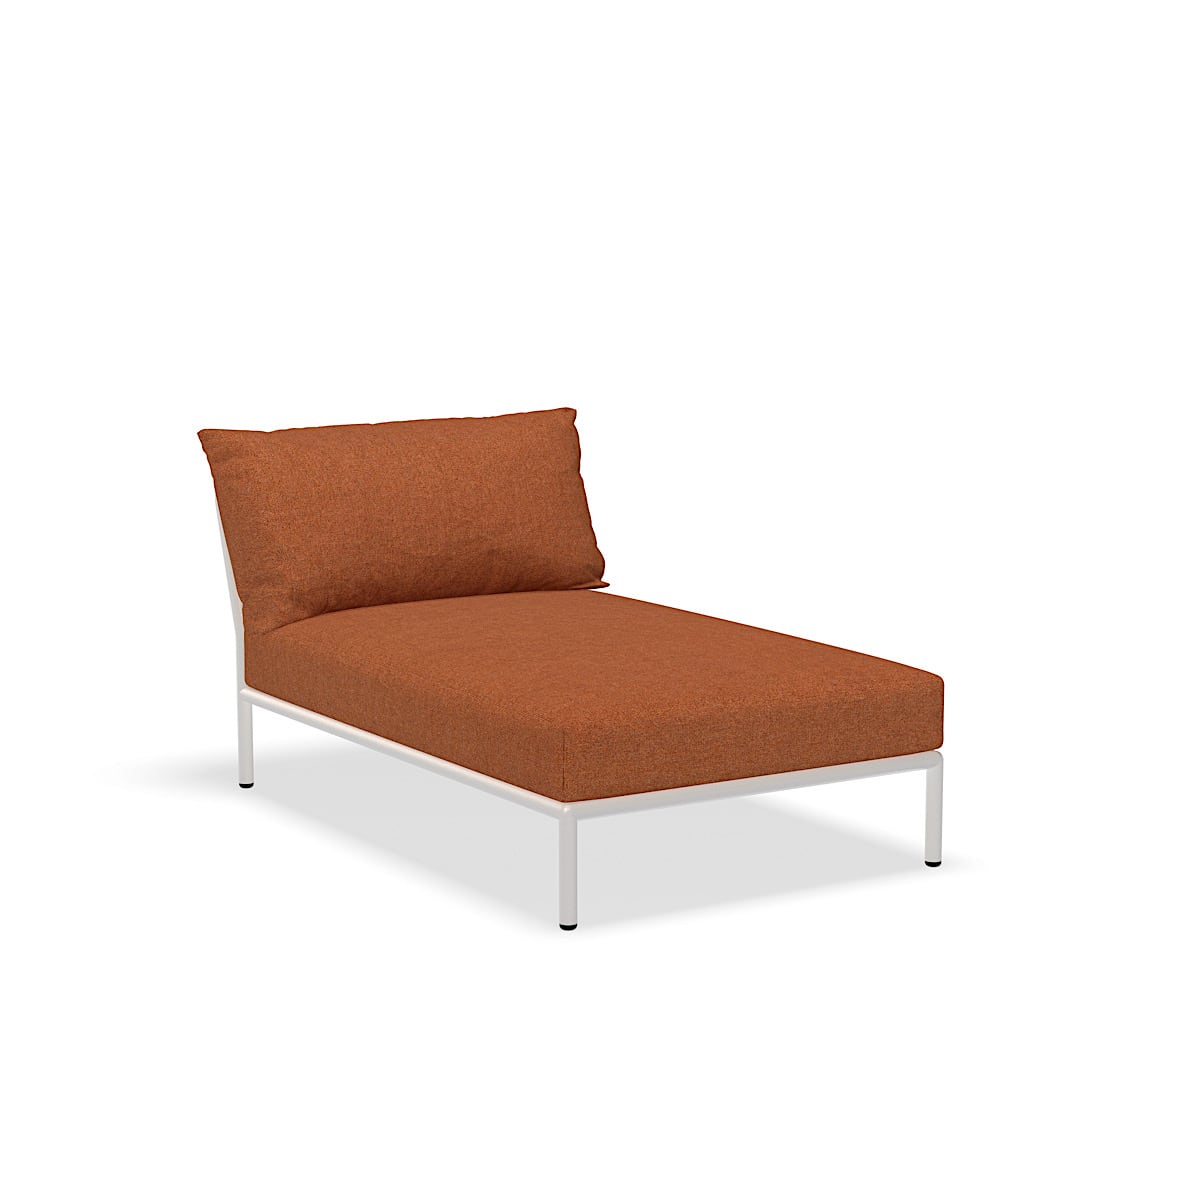 Chaise lounge  - 22209-1743 - Chaise longue, Rust (HERITAGE), structure blanche